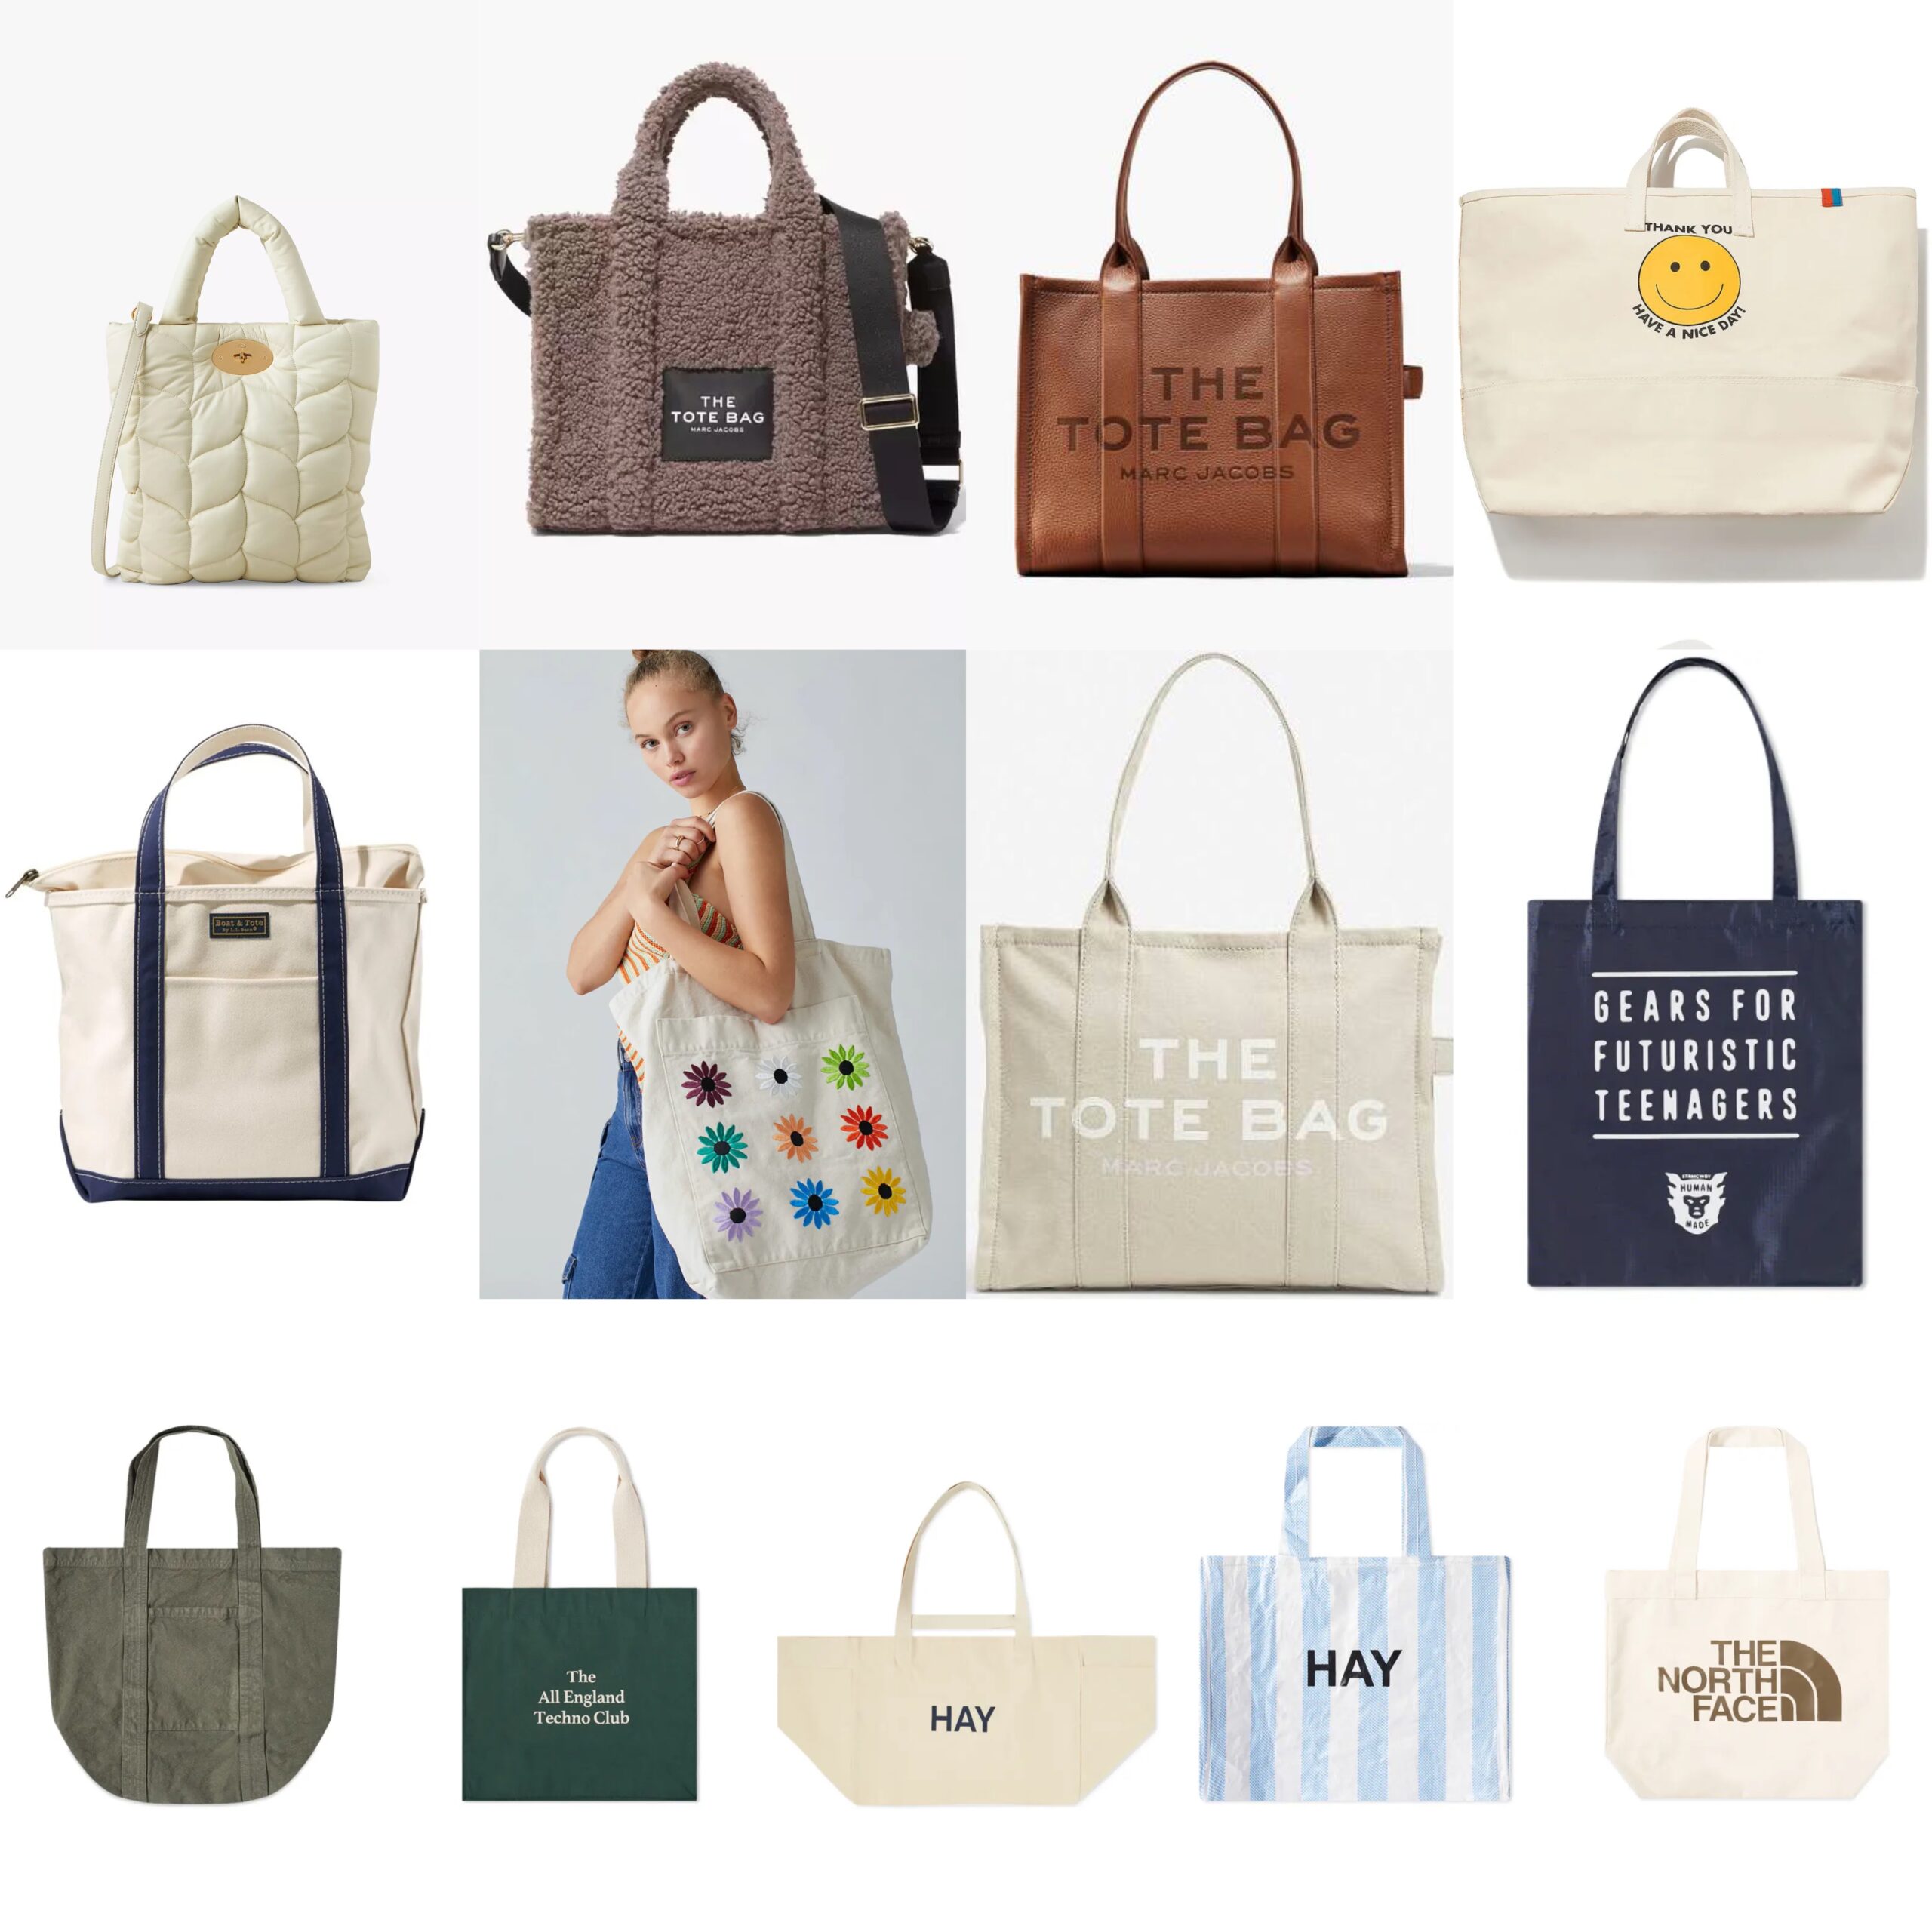 LUXURY DESIGNER TOTE BAG COMPARISON - THE BEST DESIGNER TOTE BAG TO BUY 2023  *WATCH BEFORE YOU BUY* 